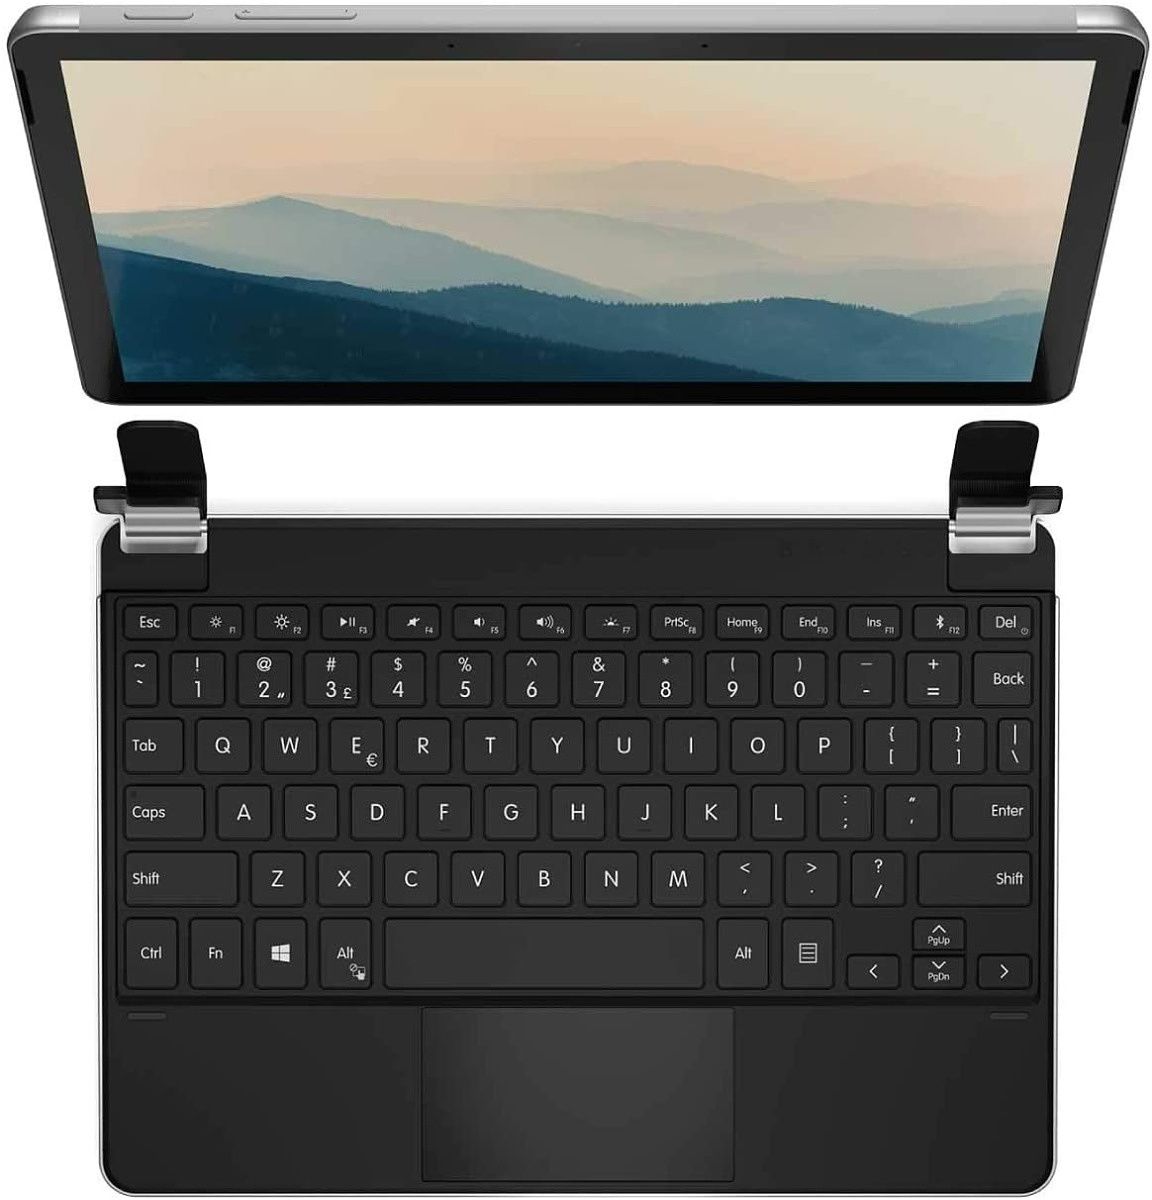 Brydge makes super cool keyboards that help the Surface Go 3 feel like a true laptop. It connects via Bluetooth and includes a Precision touchpad and backlit keyboard, all with a premium build quality that makes it easy to type on and use like a normal laptop.